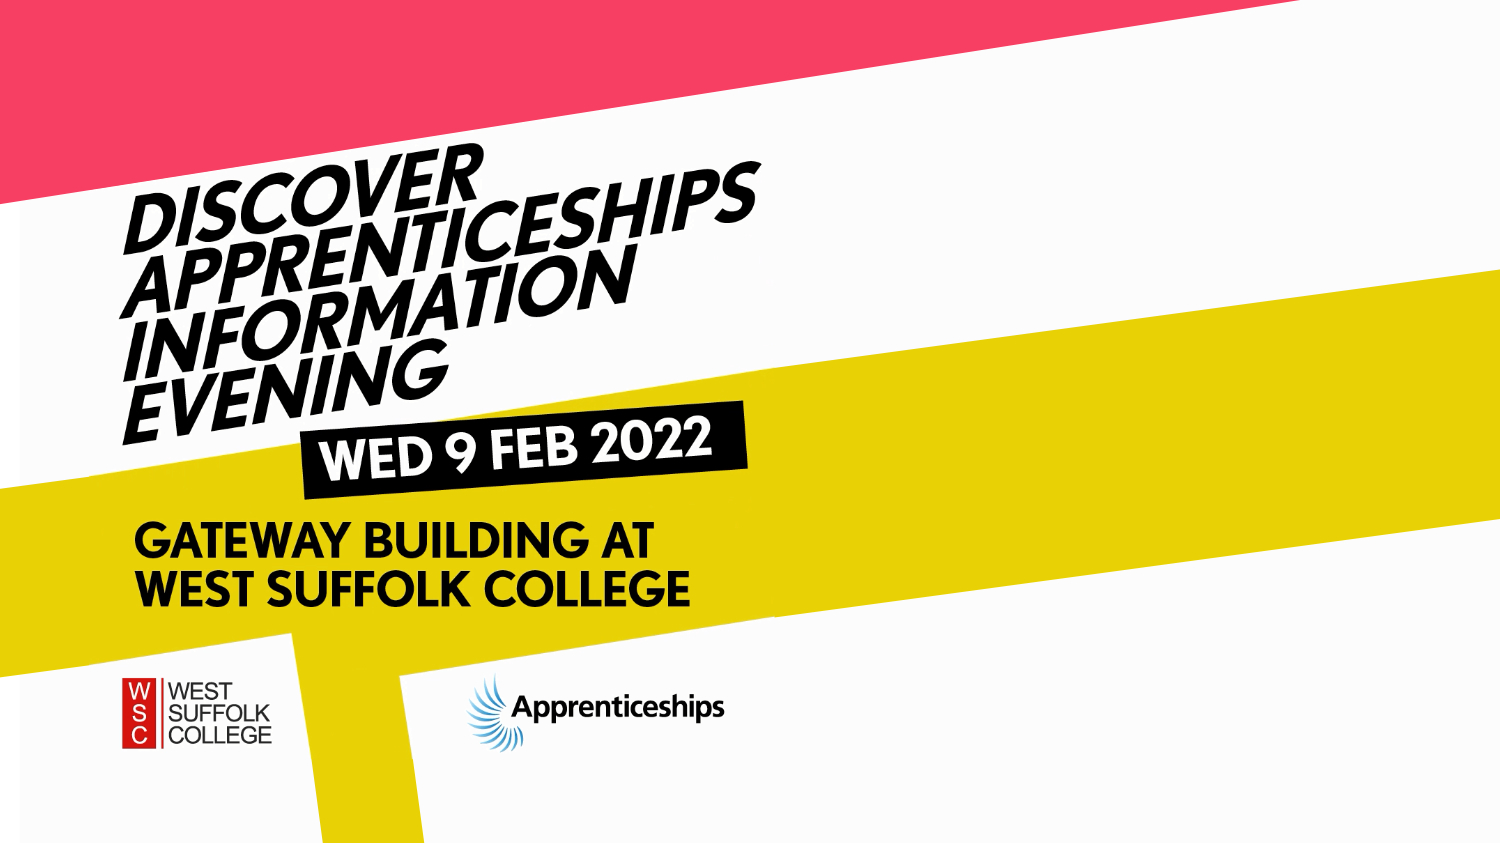 Discover Apprenticeships Evening